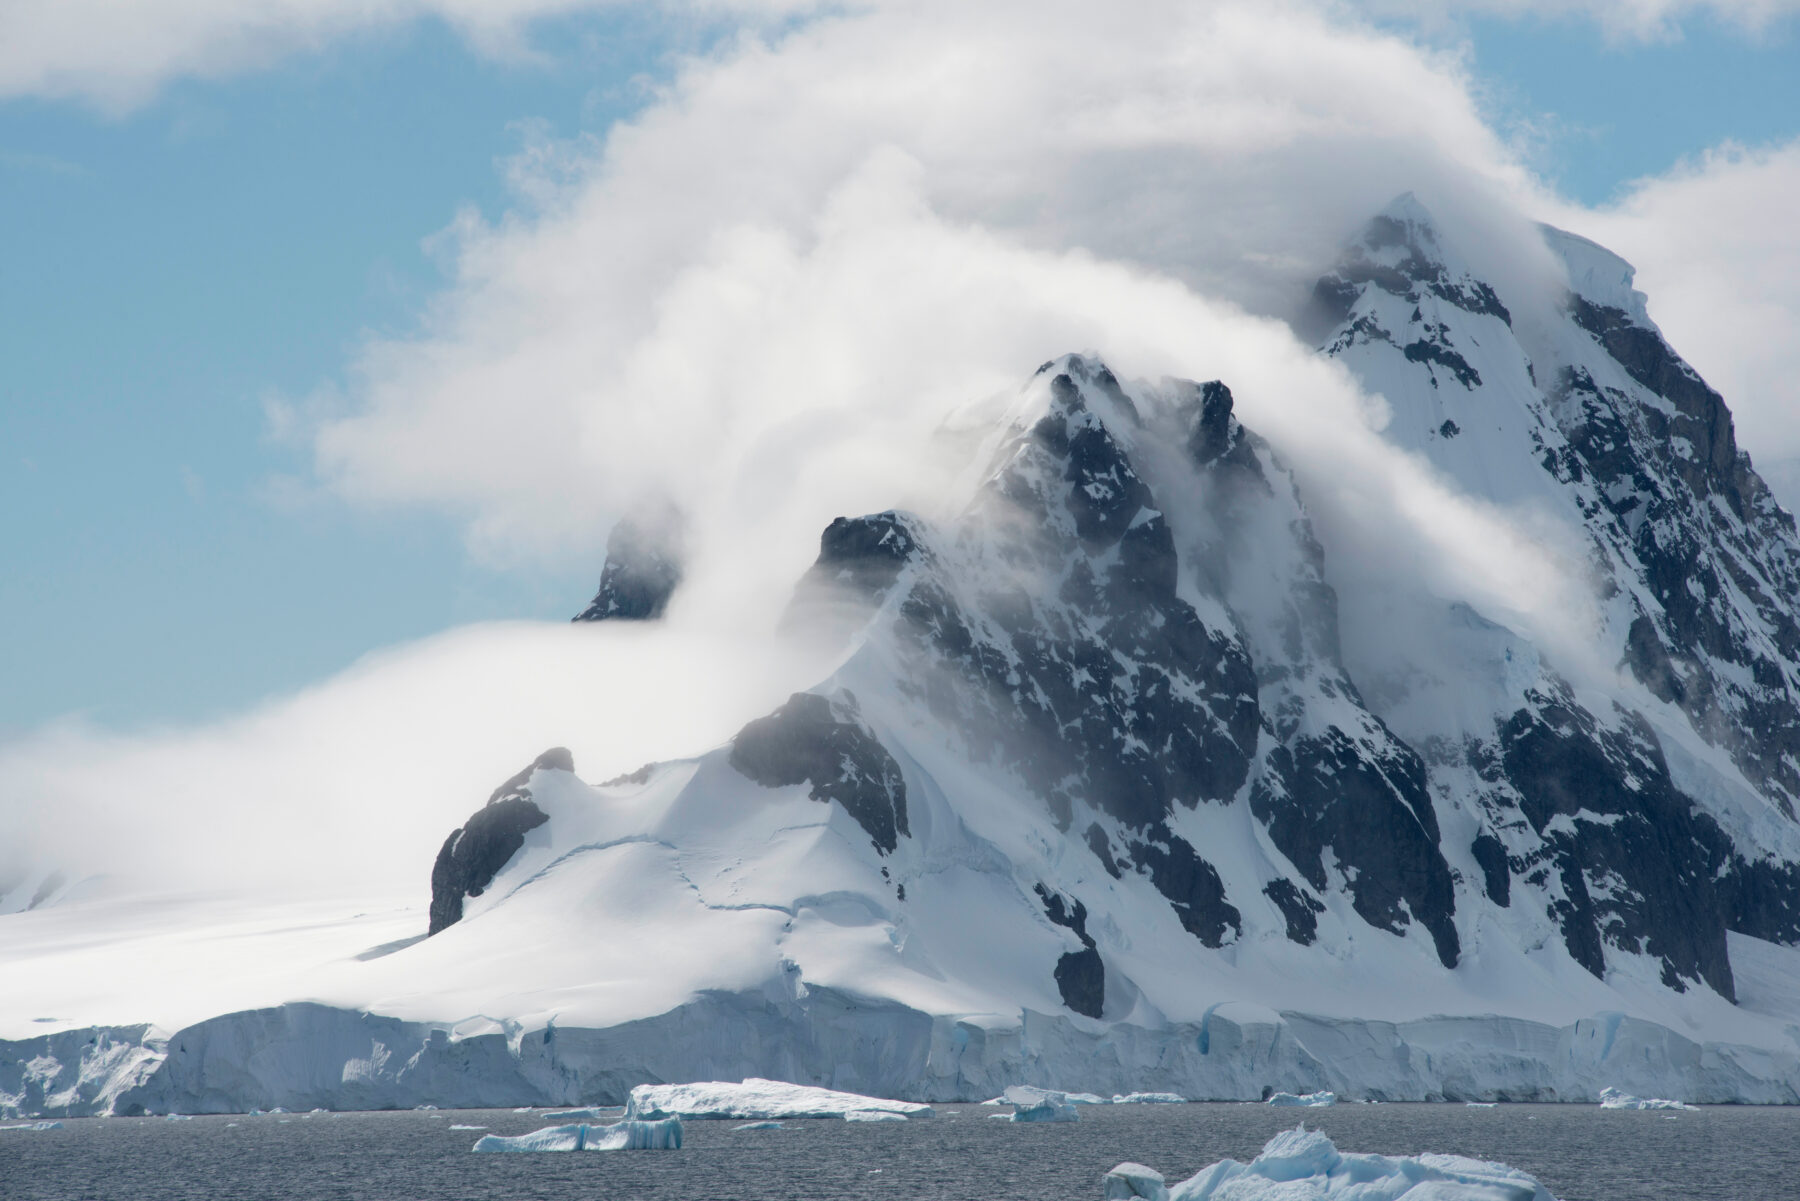 Antarctic Coastline With Snow Capped Mountains And Low Clouds